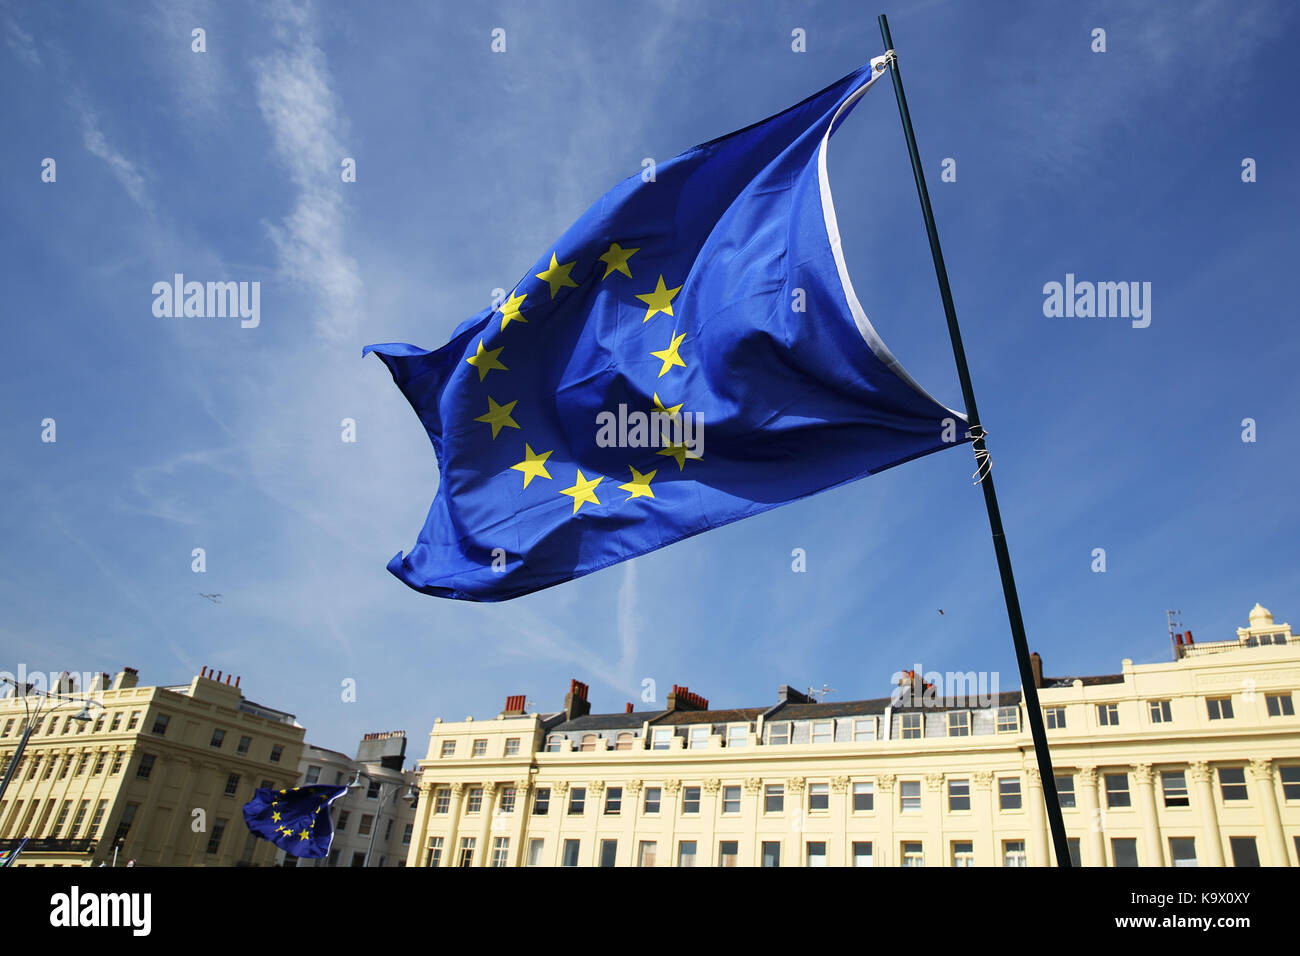 Brighton, UK. 24th September, 2017. A Pro European Union supporters waves the EU flag during a protest against Brexit in Brighton, UK, Sunday, September 24, 2017. Protesters rallied outside the annual Labour Party Conference being held in Brighton and attended by the opposition leader Jeremy Corbyn. Photograph : Credit: Luke MacGregor/Alamy Live News Stock Photo